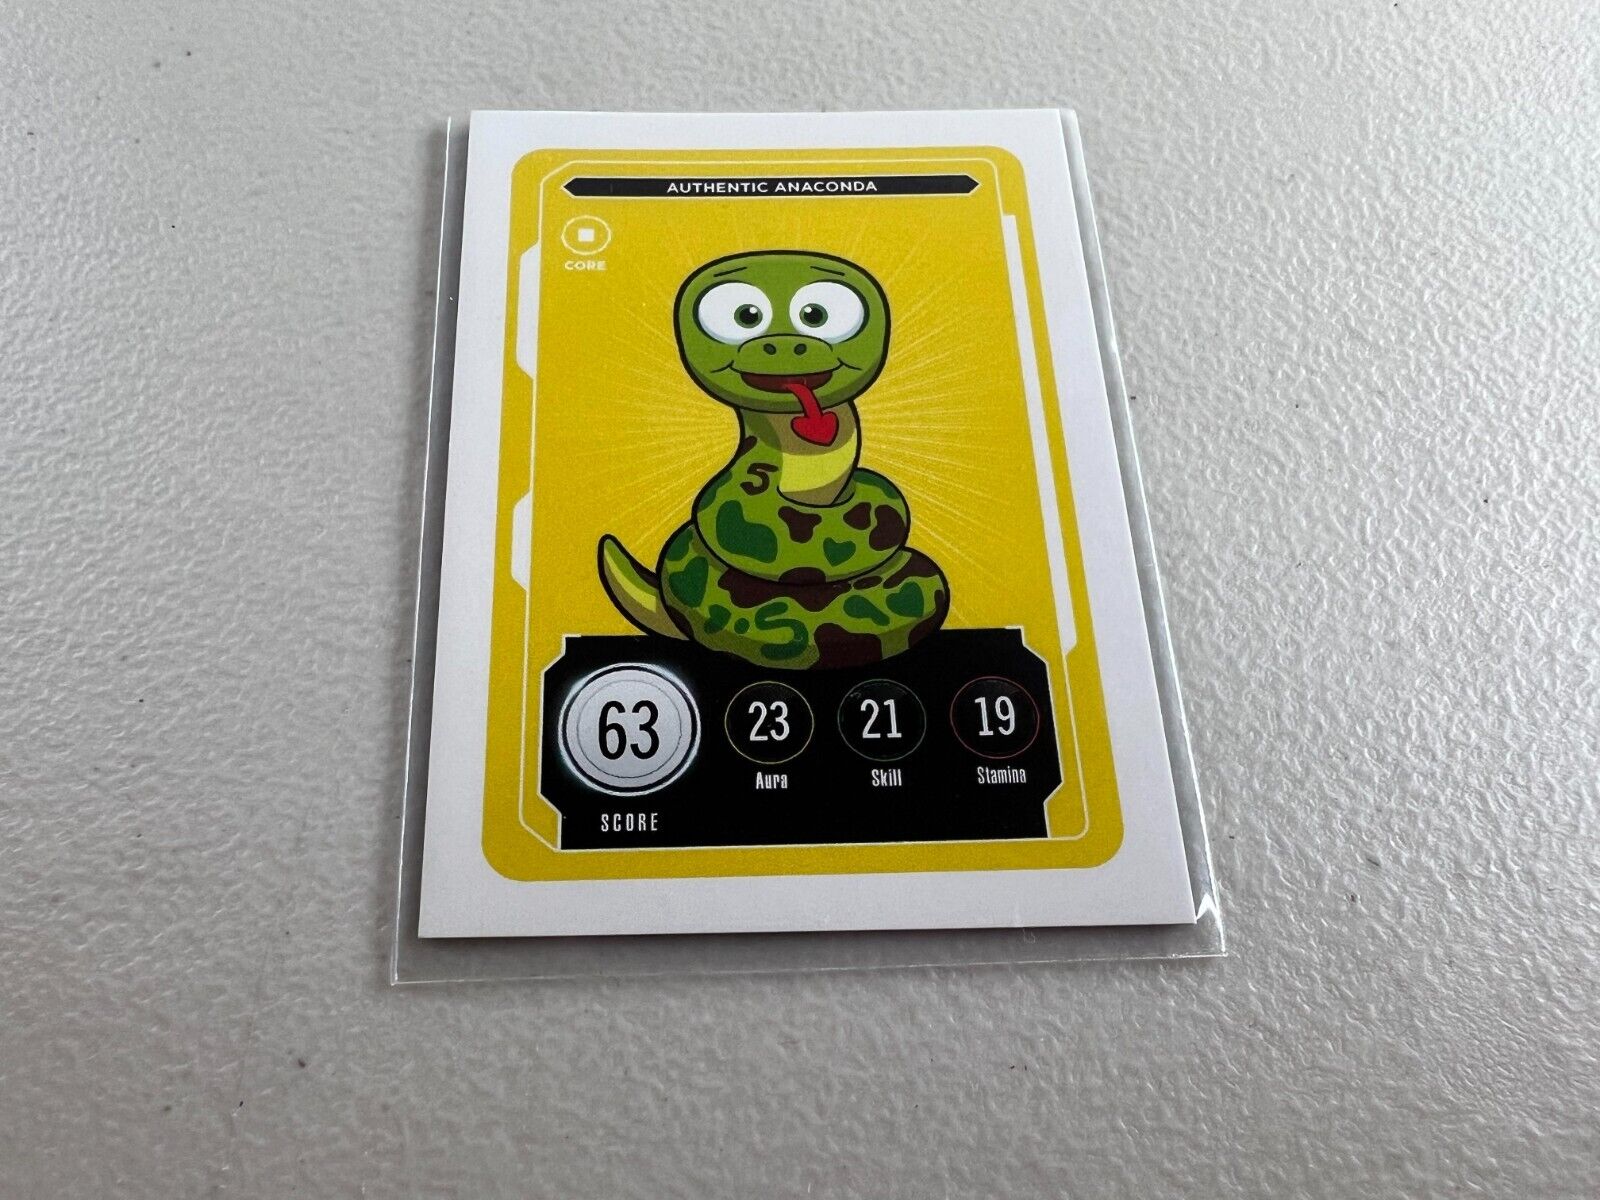 Authentic Anaconda VeeFriends Series 2 Compete and Collect Core Card Gary Vee